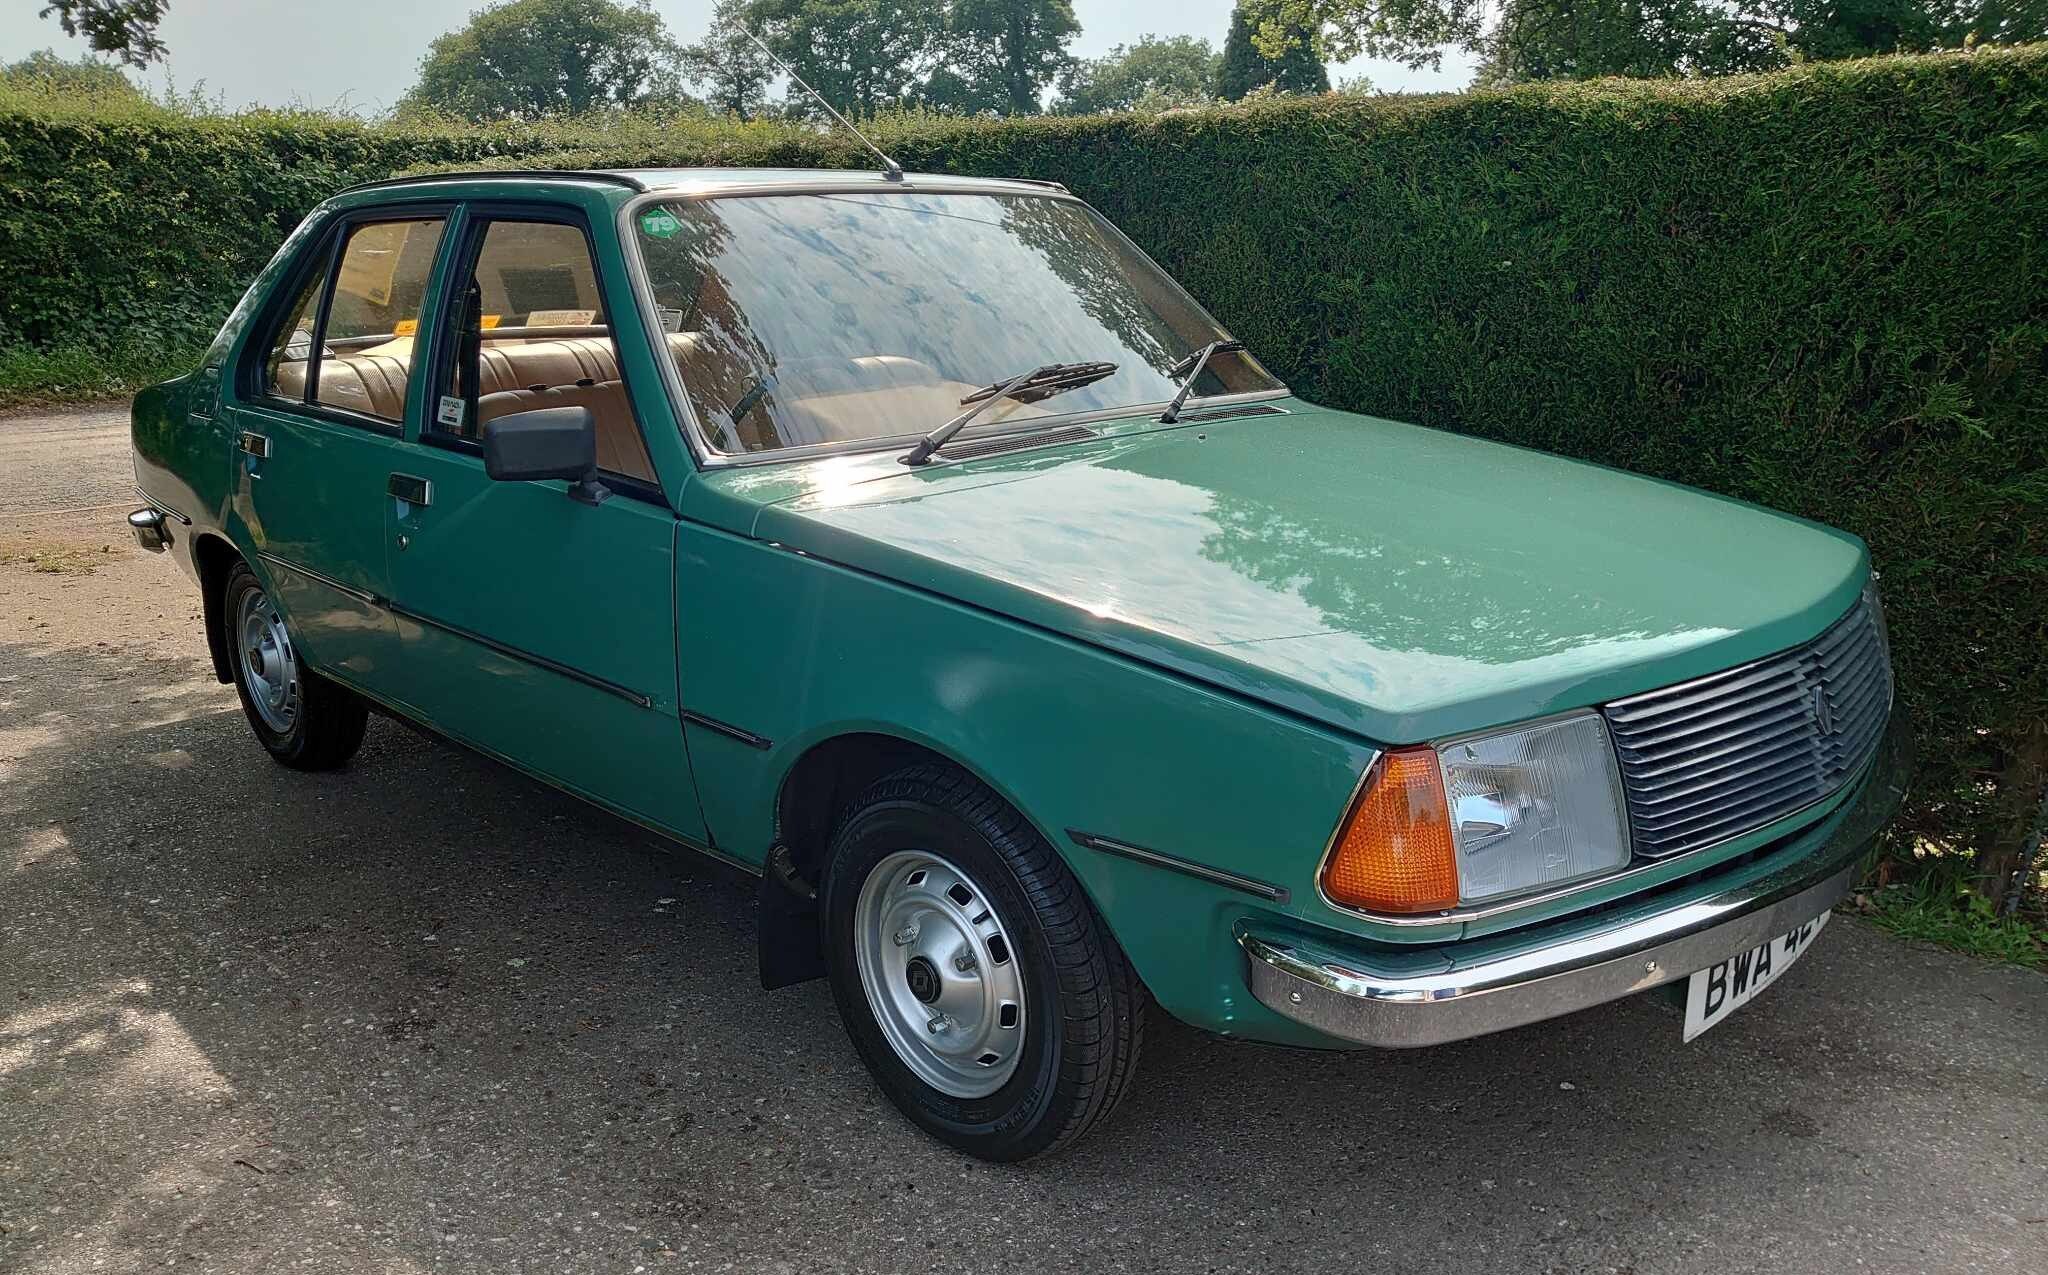 uk’s rarest cars: the 1979 renault 18 tl, one of only 26 left